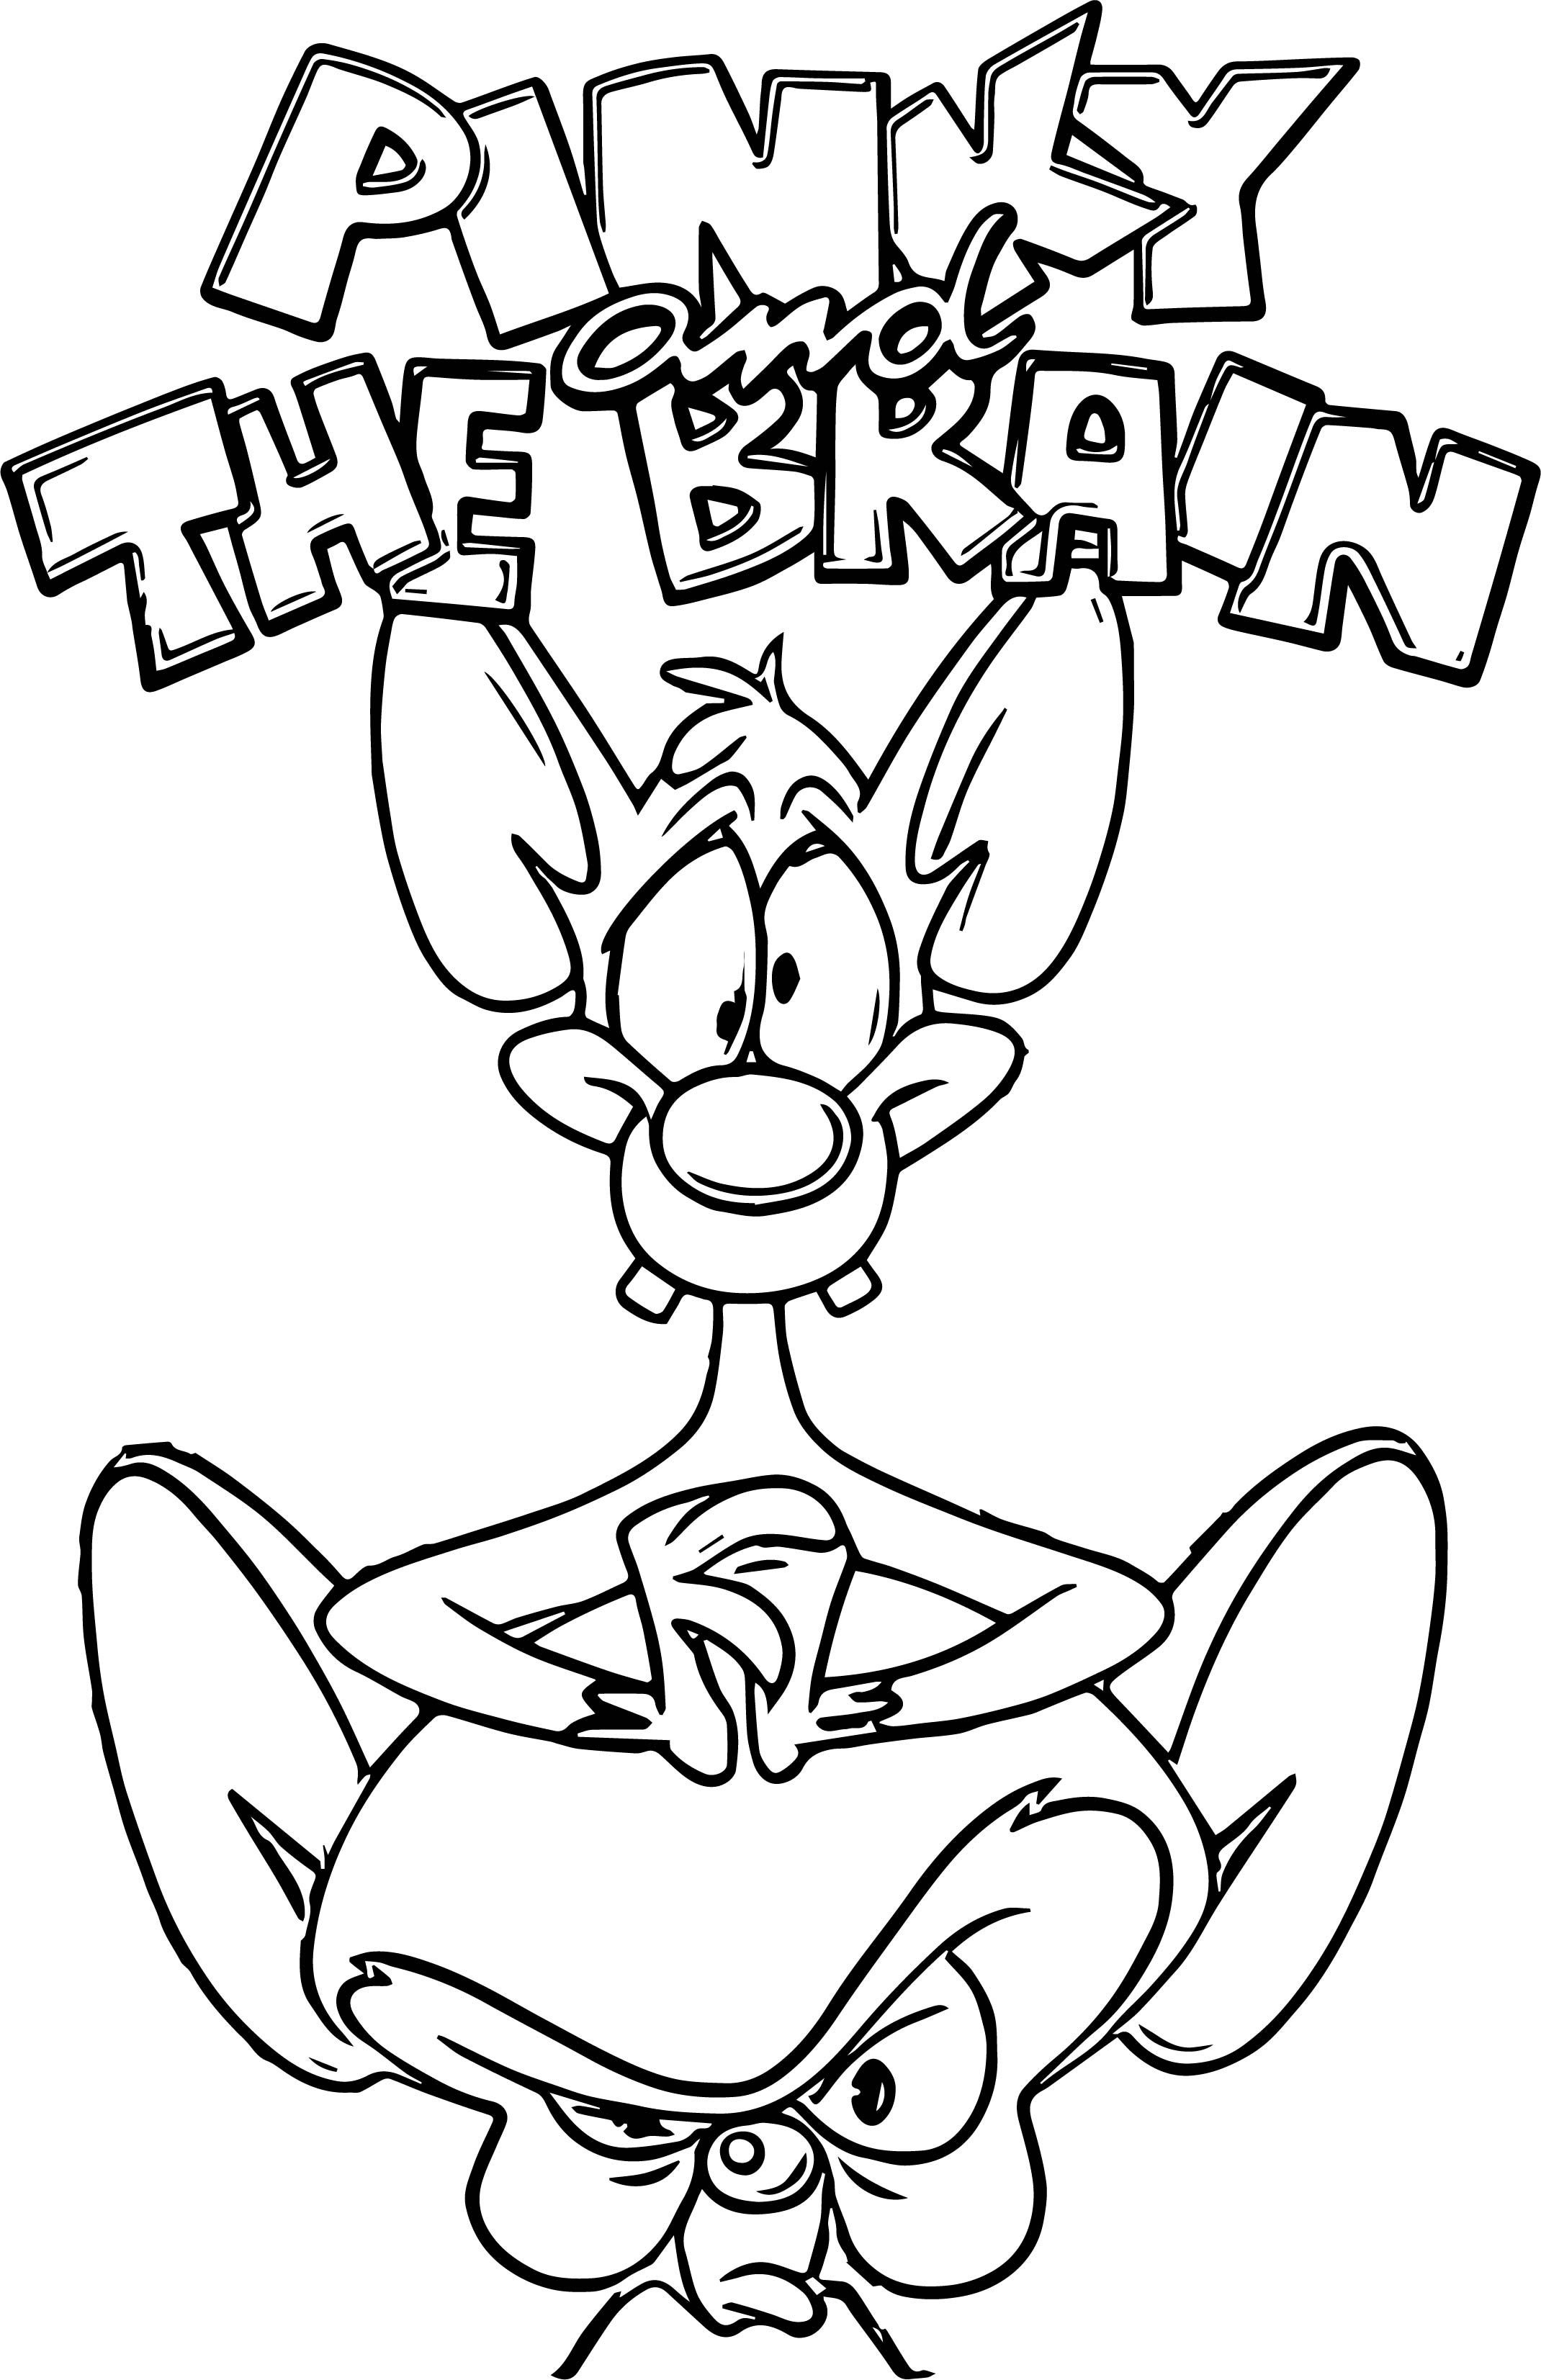 Pinky and the Brain coloring pages, Classic cartoons, Kids activities, Cartoon characters, 2140x3310 HD Phone